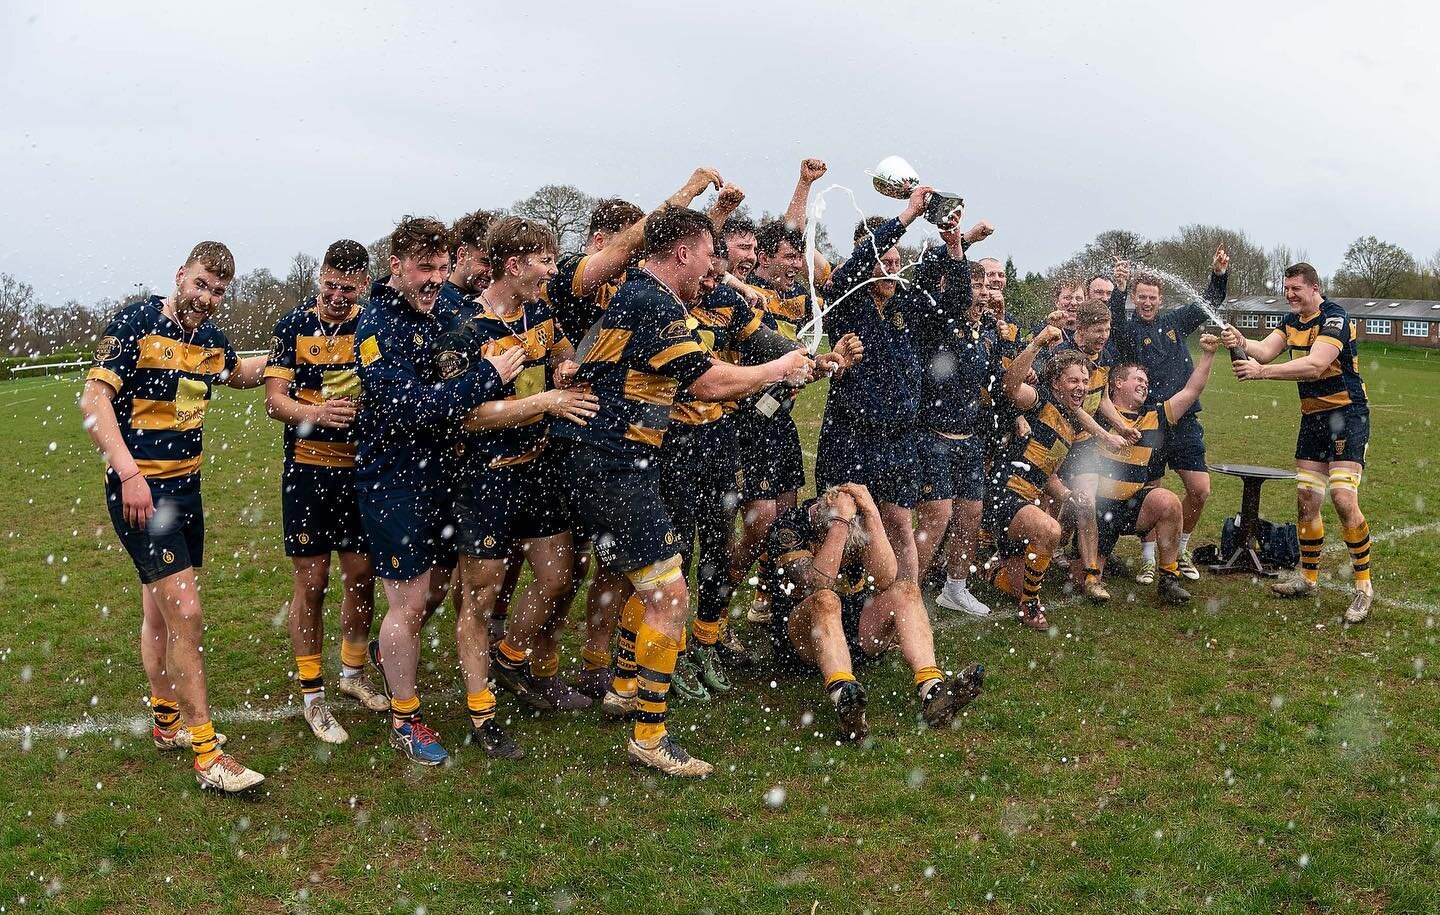 🏆 LEAGUE CHAMPIONS! 🏆

Our 2nd XV have been crowned league champions after beating Dartford Valley at home yesterday 💪

The 2nd XV have now been promoted to the same league that our 1st XV started in 10 years ago!  It came down to the final weeken